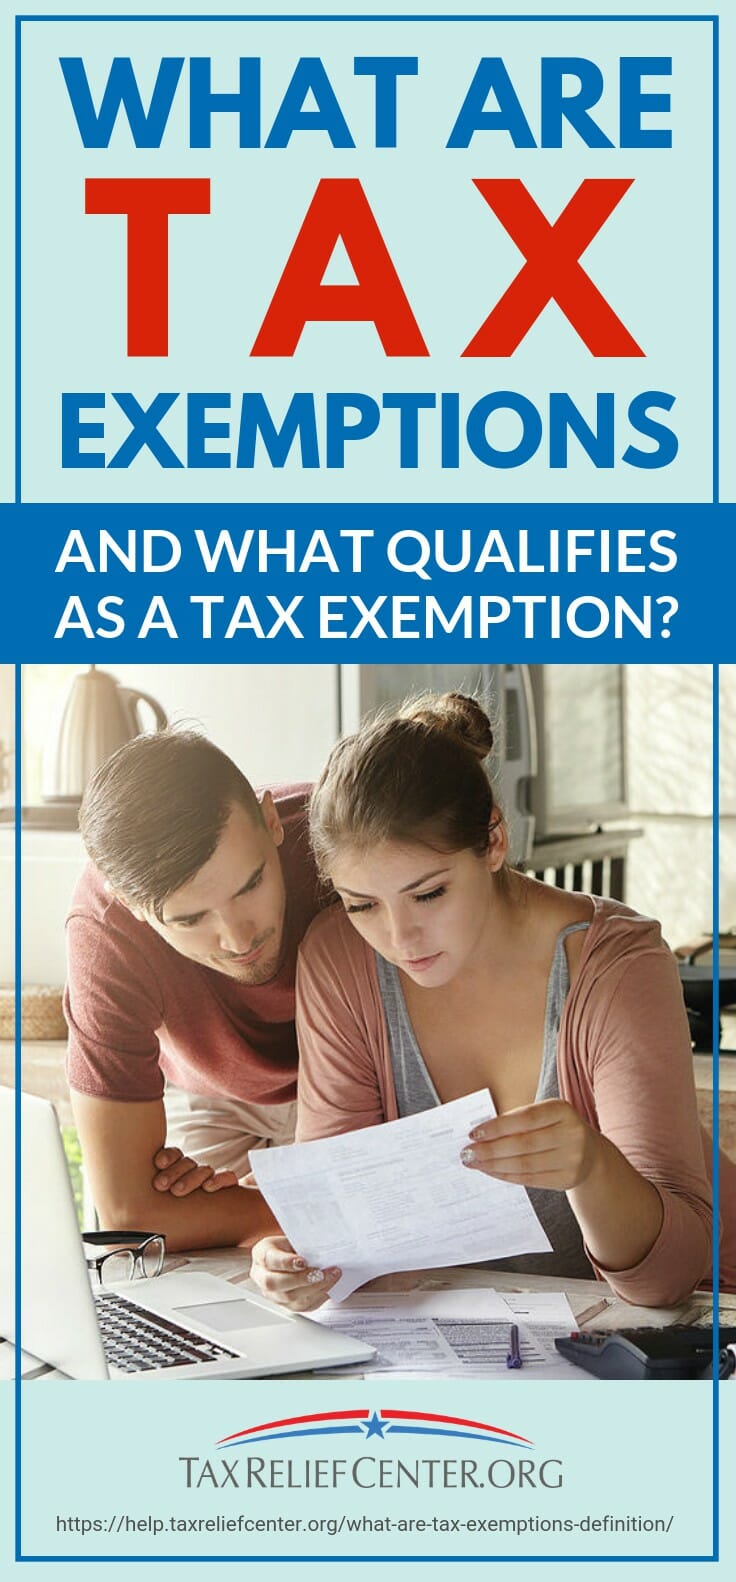 What Are Tax Exemptions And What Qualifies As A Tax Exemption? https://help.taxreliefcenter.org/what-are-tax-exemptions-definition/